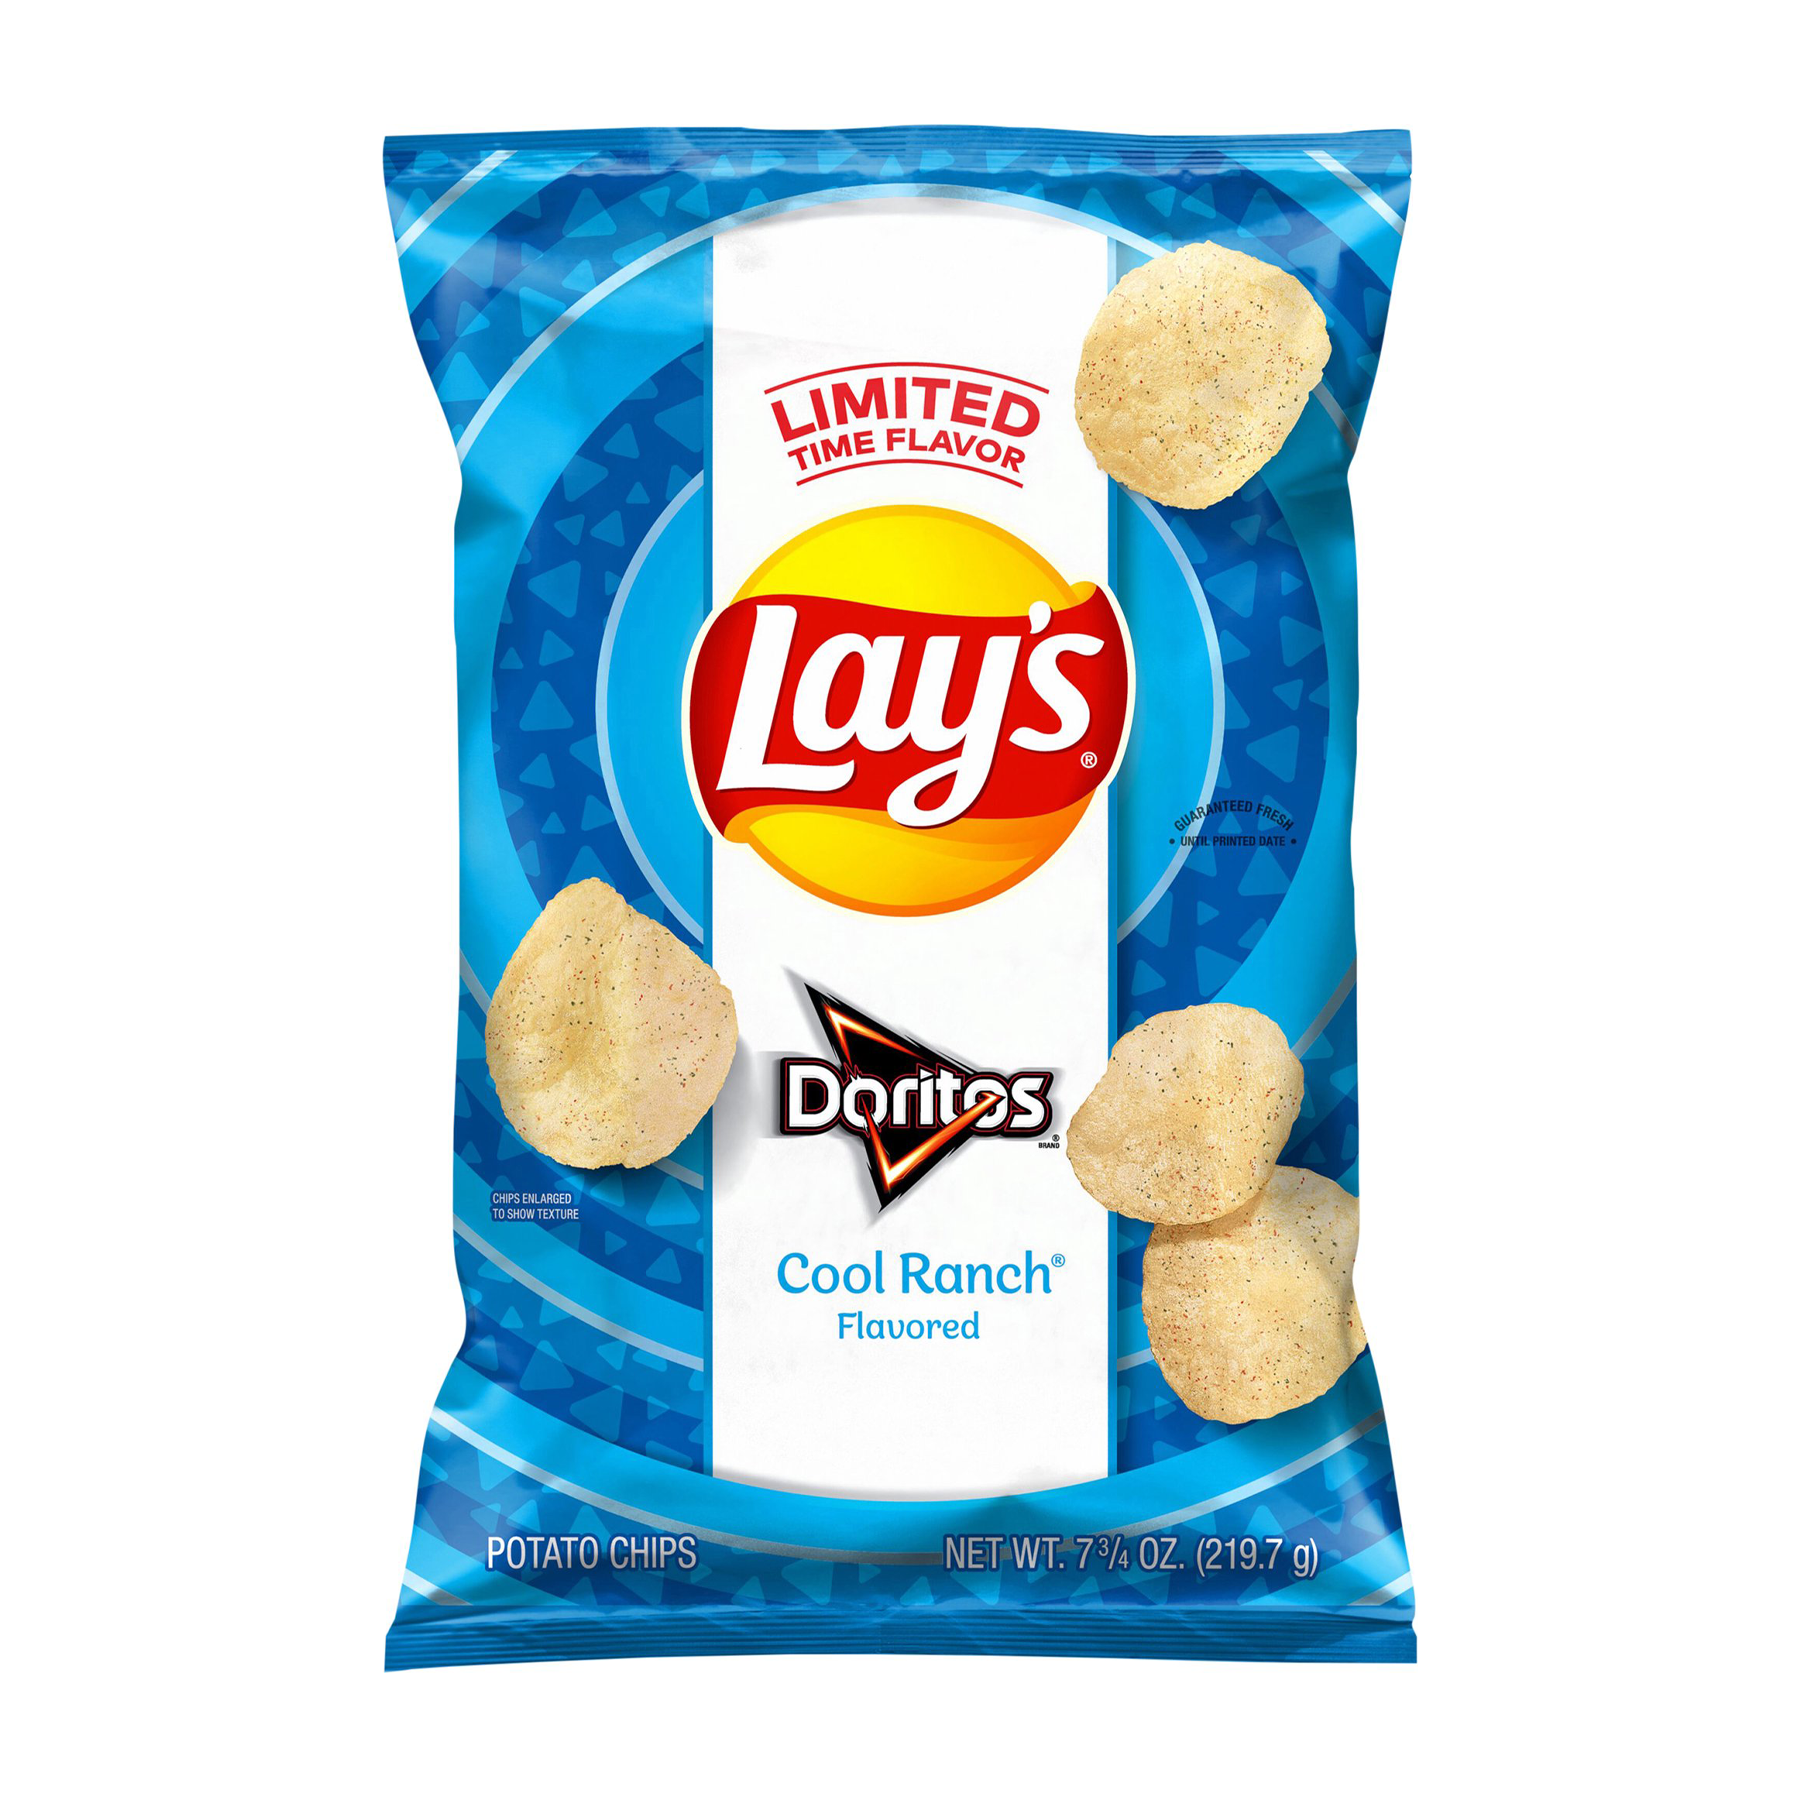 Lays Doritos Cool Ranch Flavored Chips